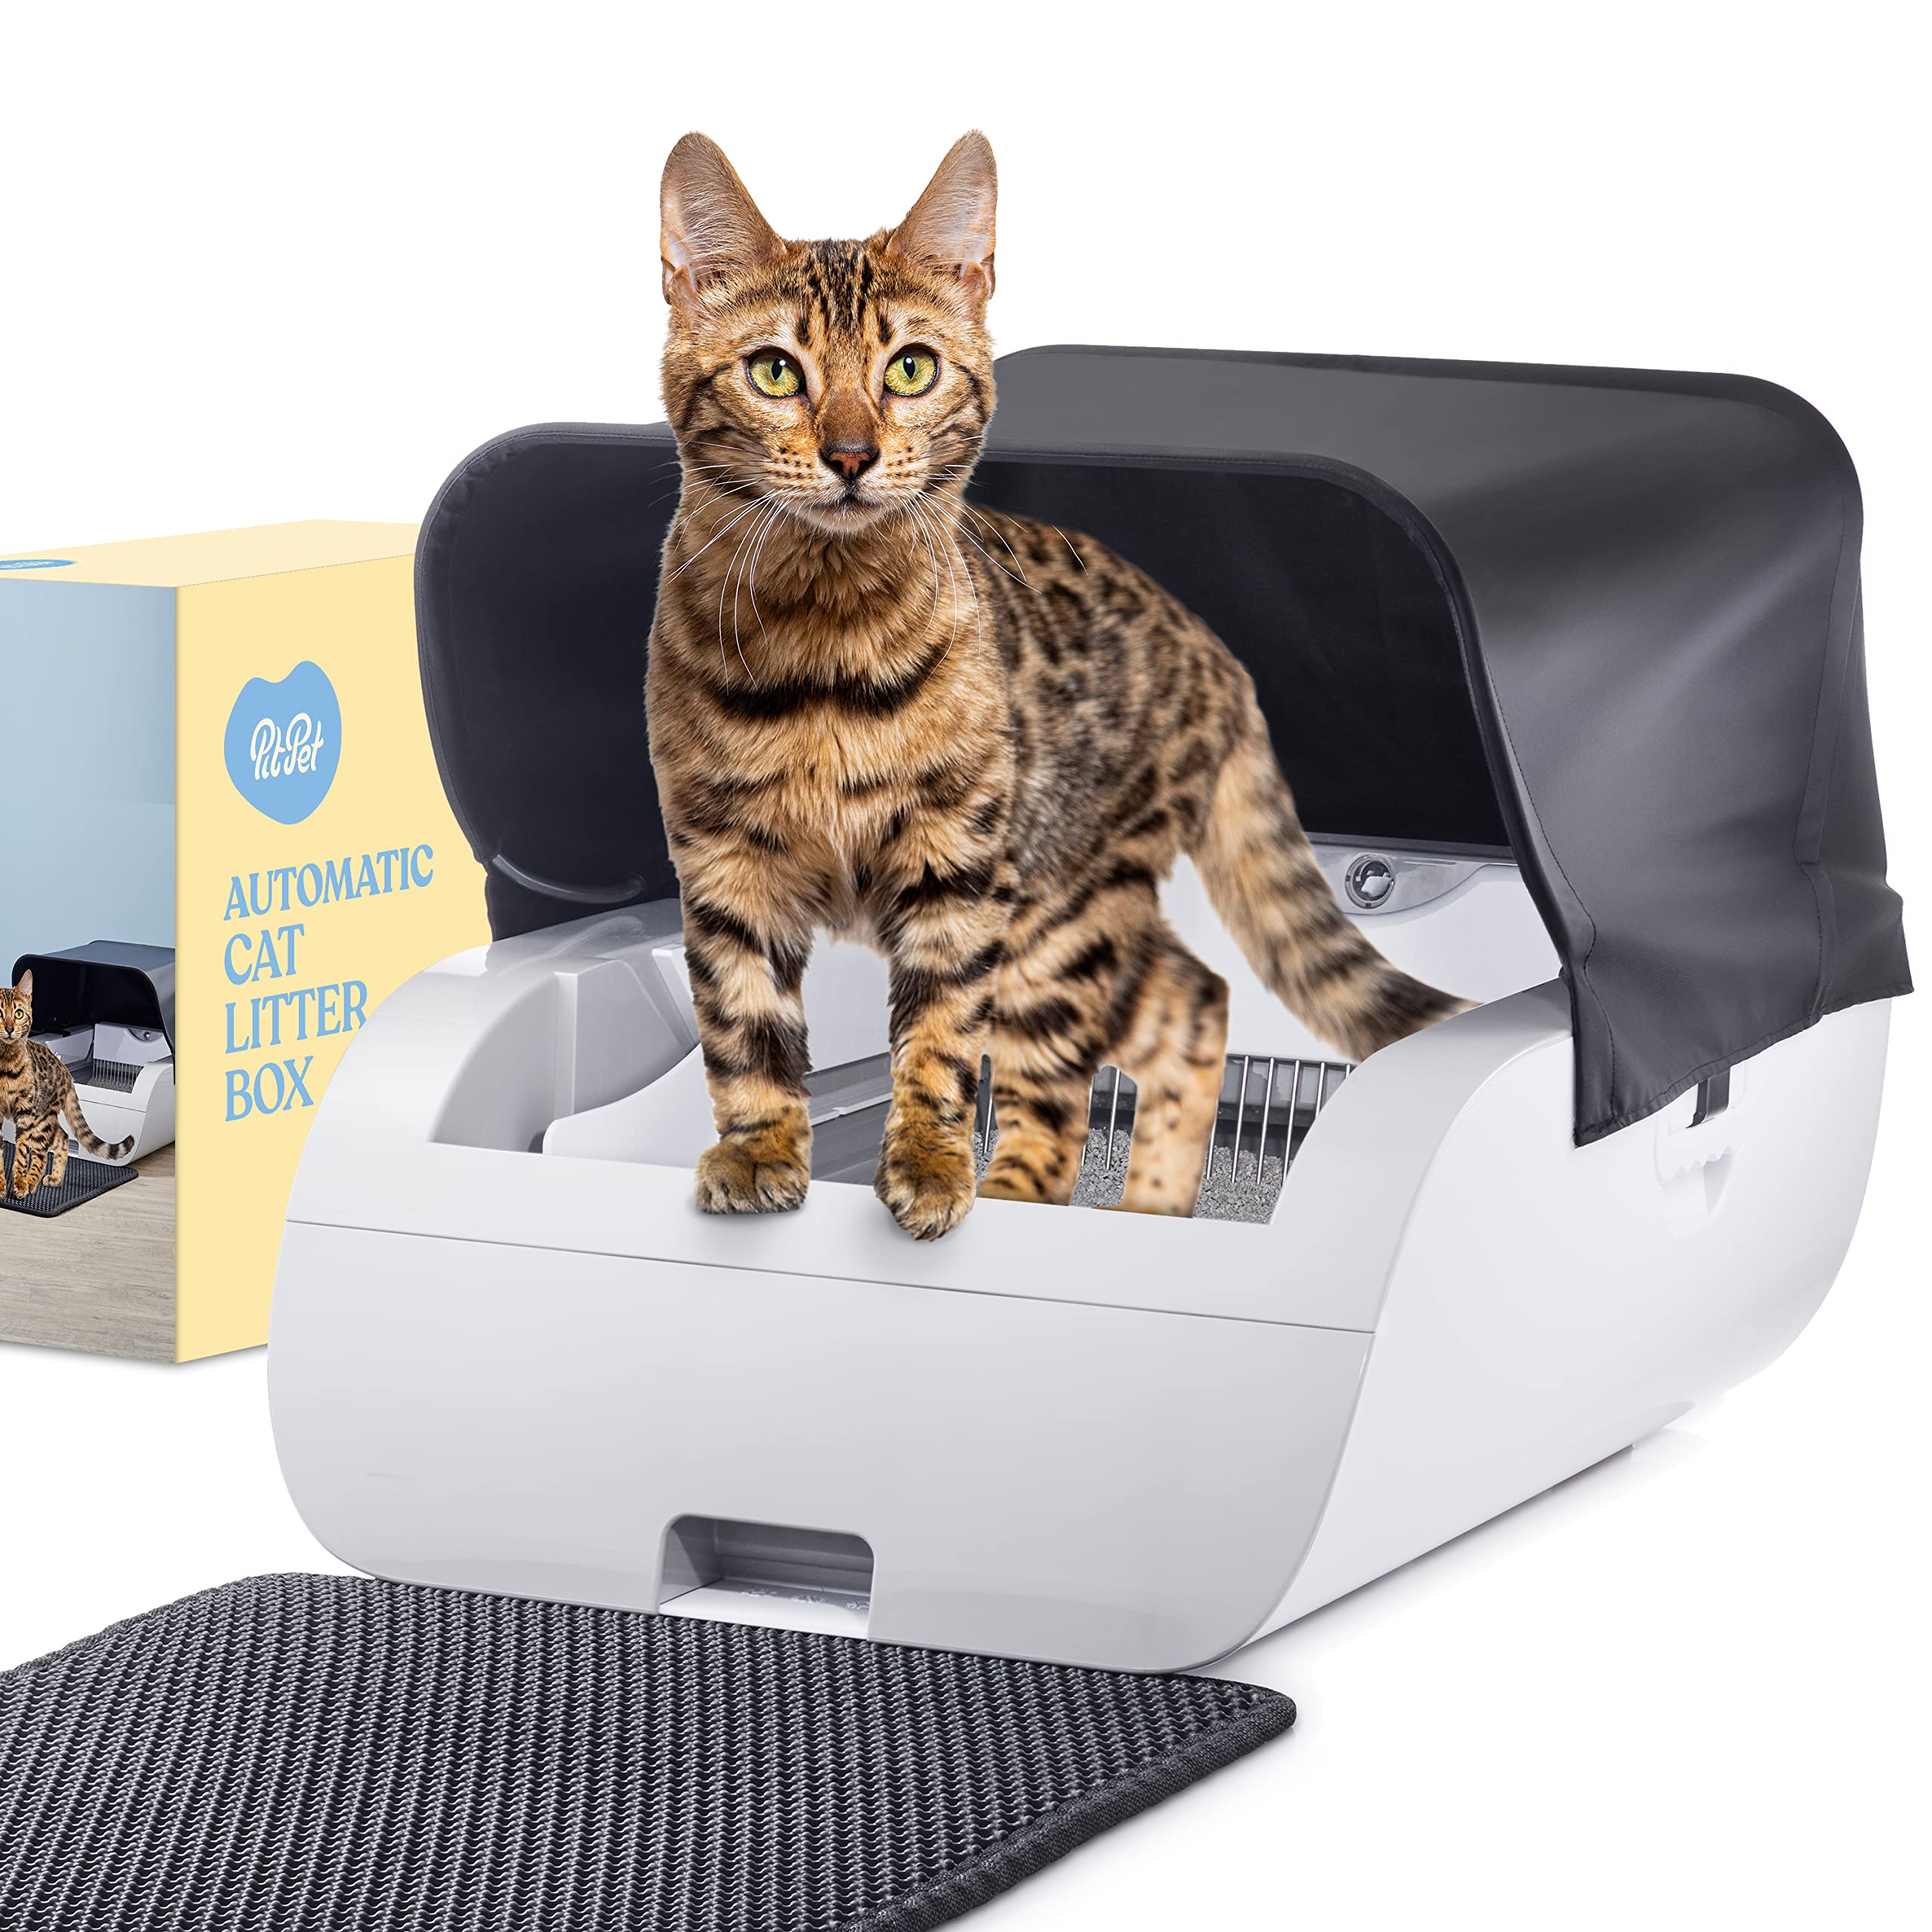 Smart Automatic Cat Litter Box - Self Cleaning Cat Litter Box with Built in Odor Eliminator -Works with Clumping Cat Litter (No Expensive Refills) Large Cat Litter Box with Hood & Litter Mat.  - Acceptable